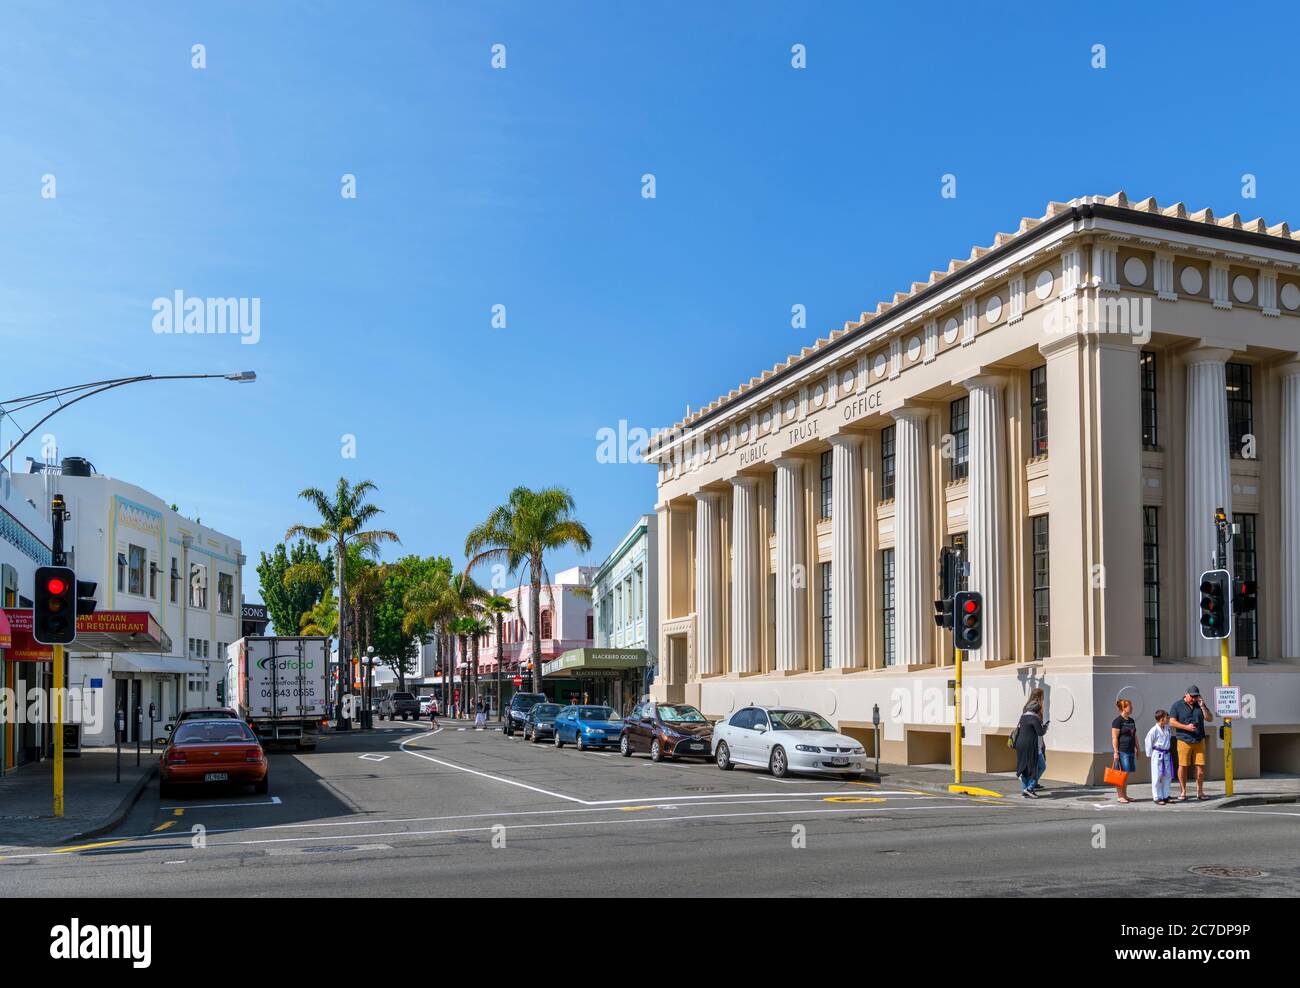 Public Trust Office building on Dalton Street in the art deco district of downtown Napier, North Island, New Zealand Stock Photo